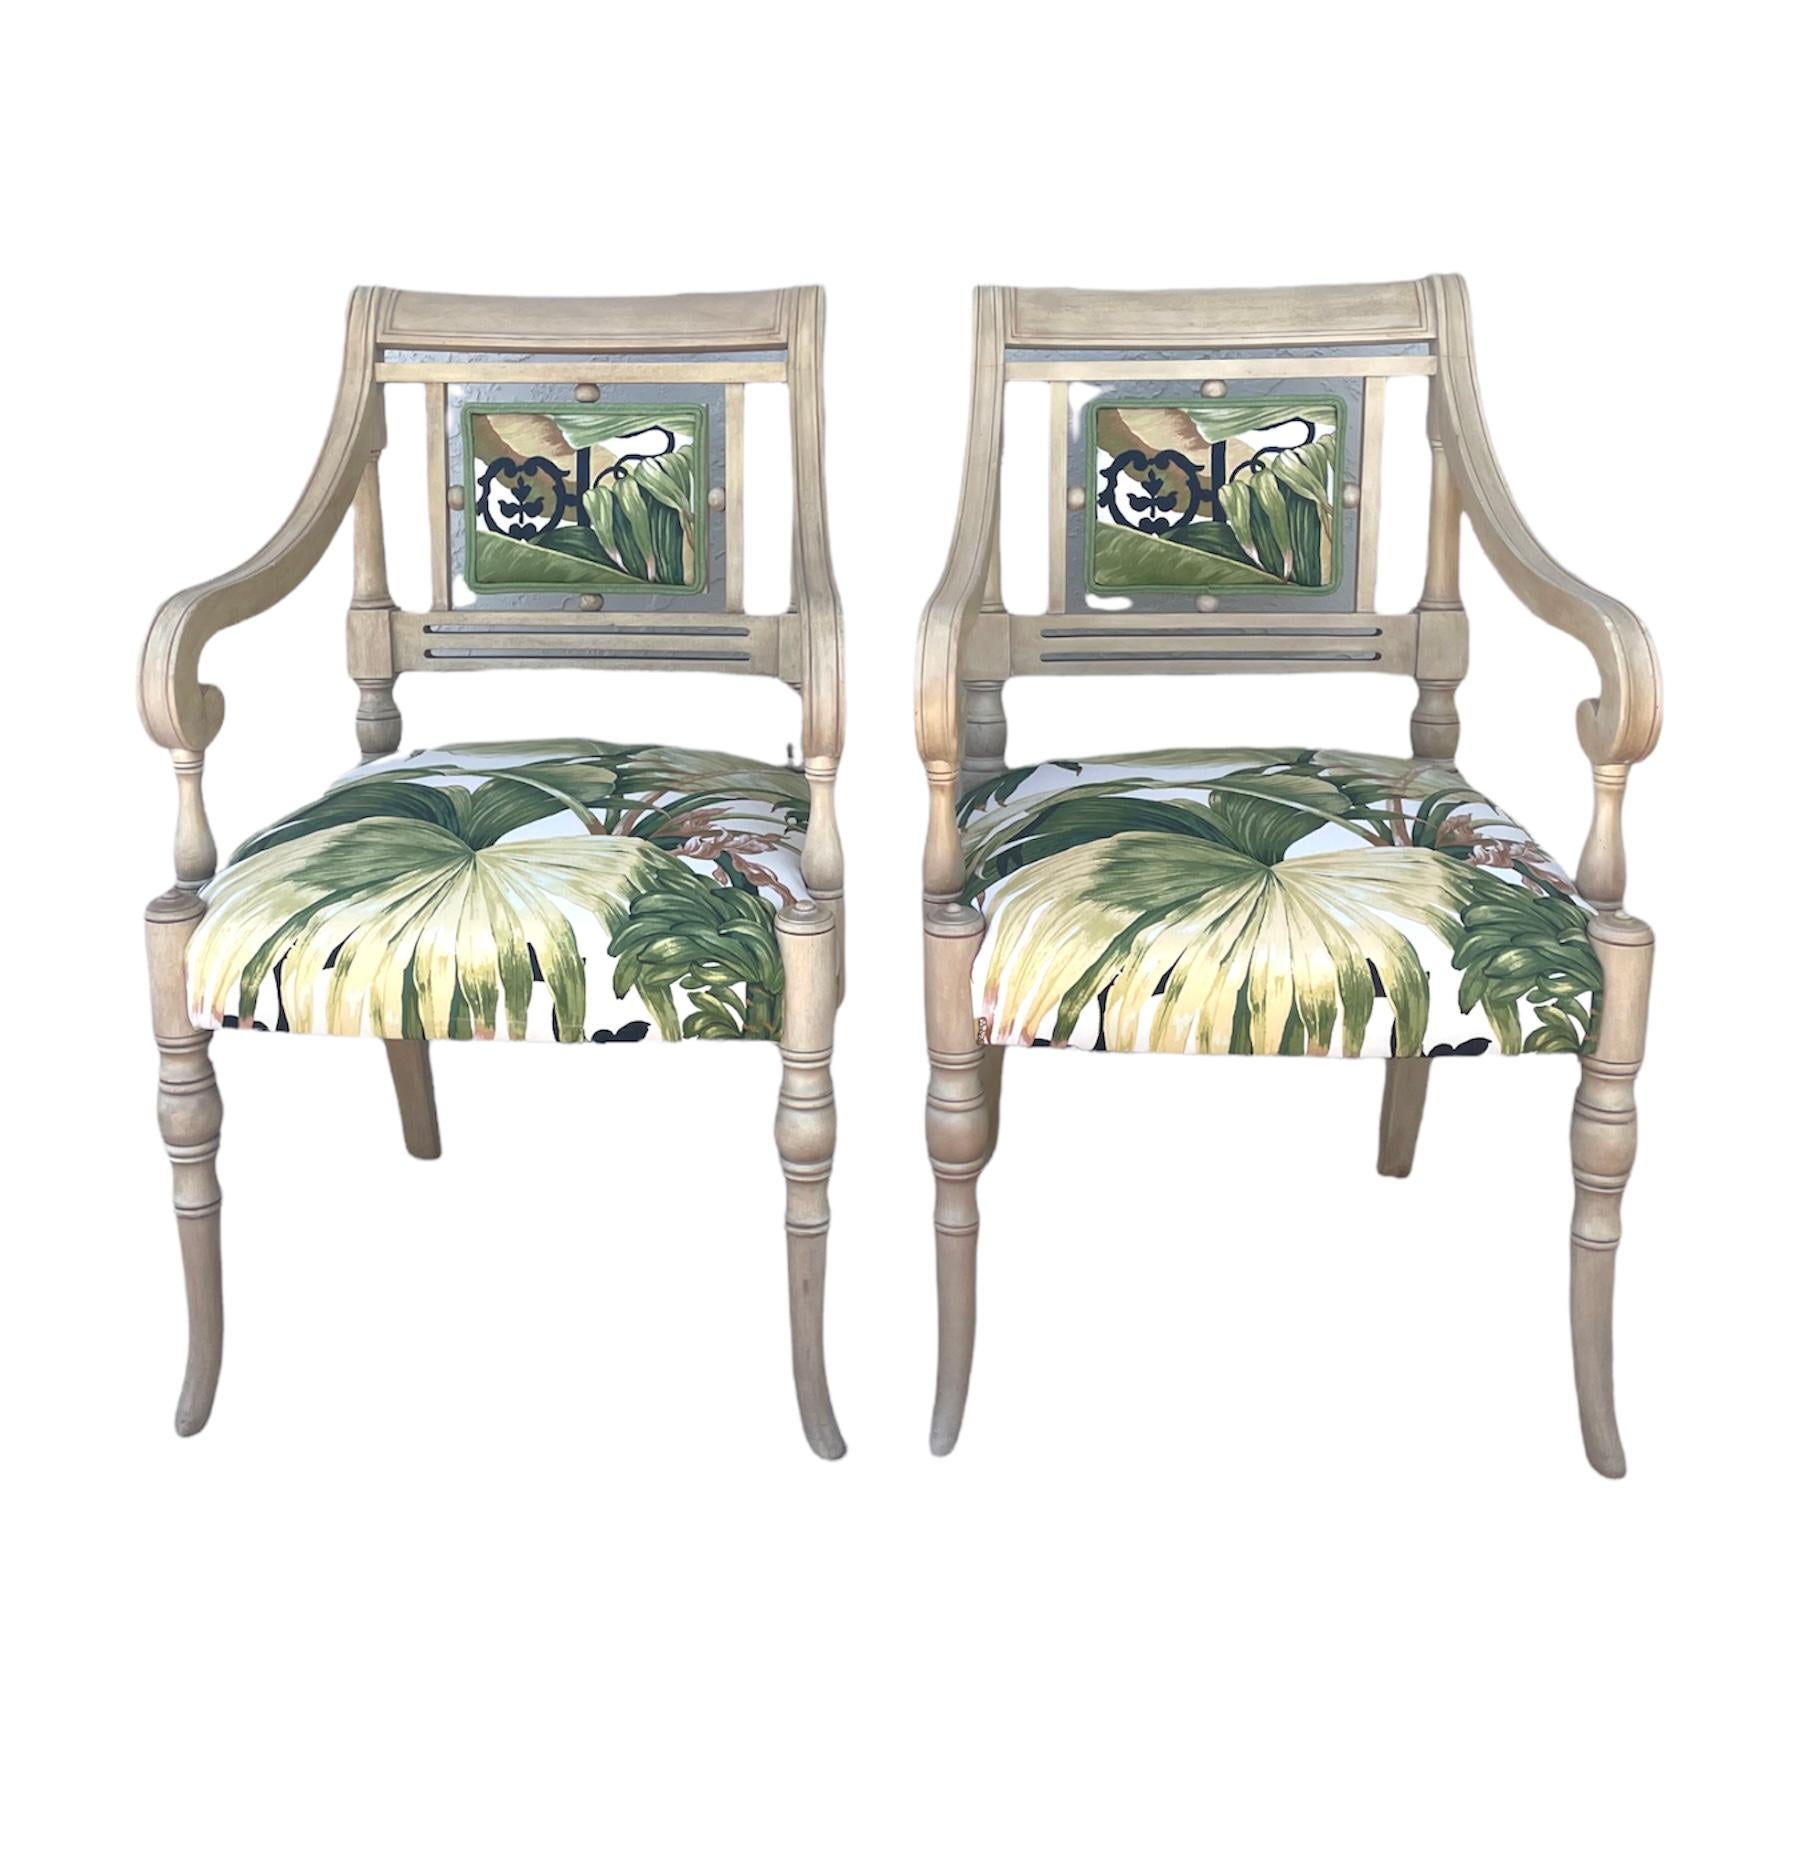 Painted Palm Beach Styled Arm Chairs with Carved, Plaid Legs